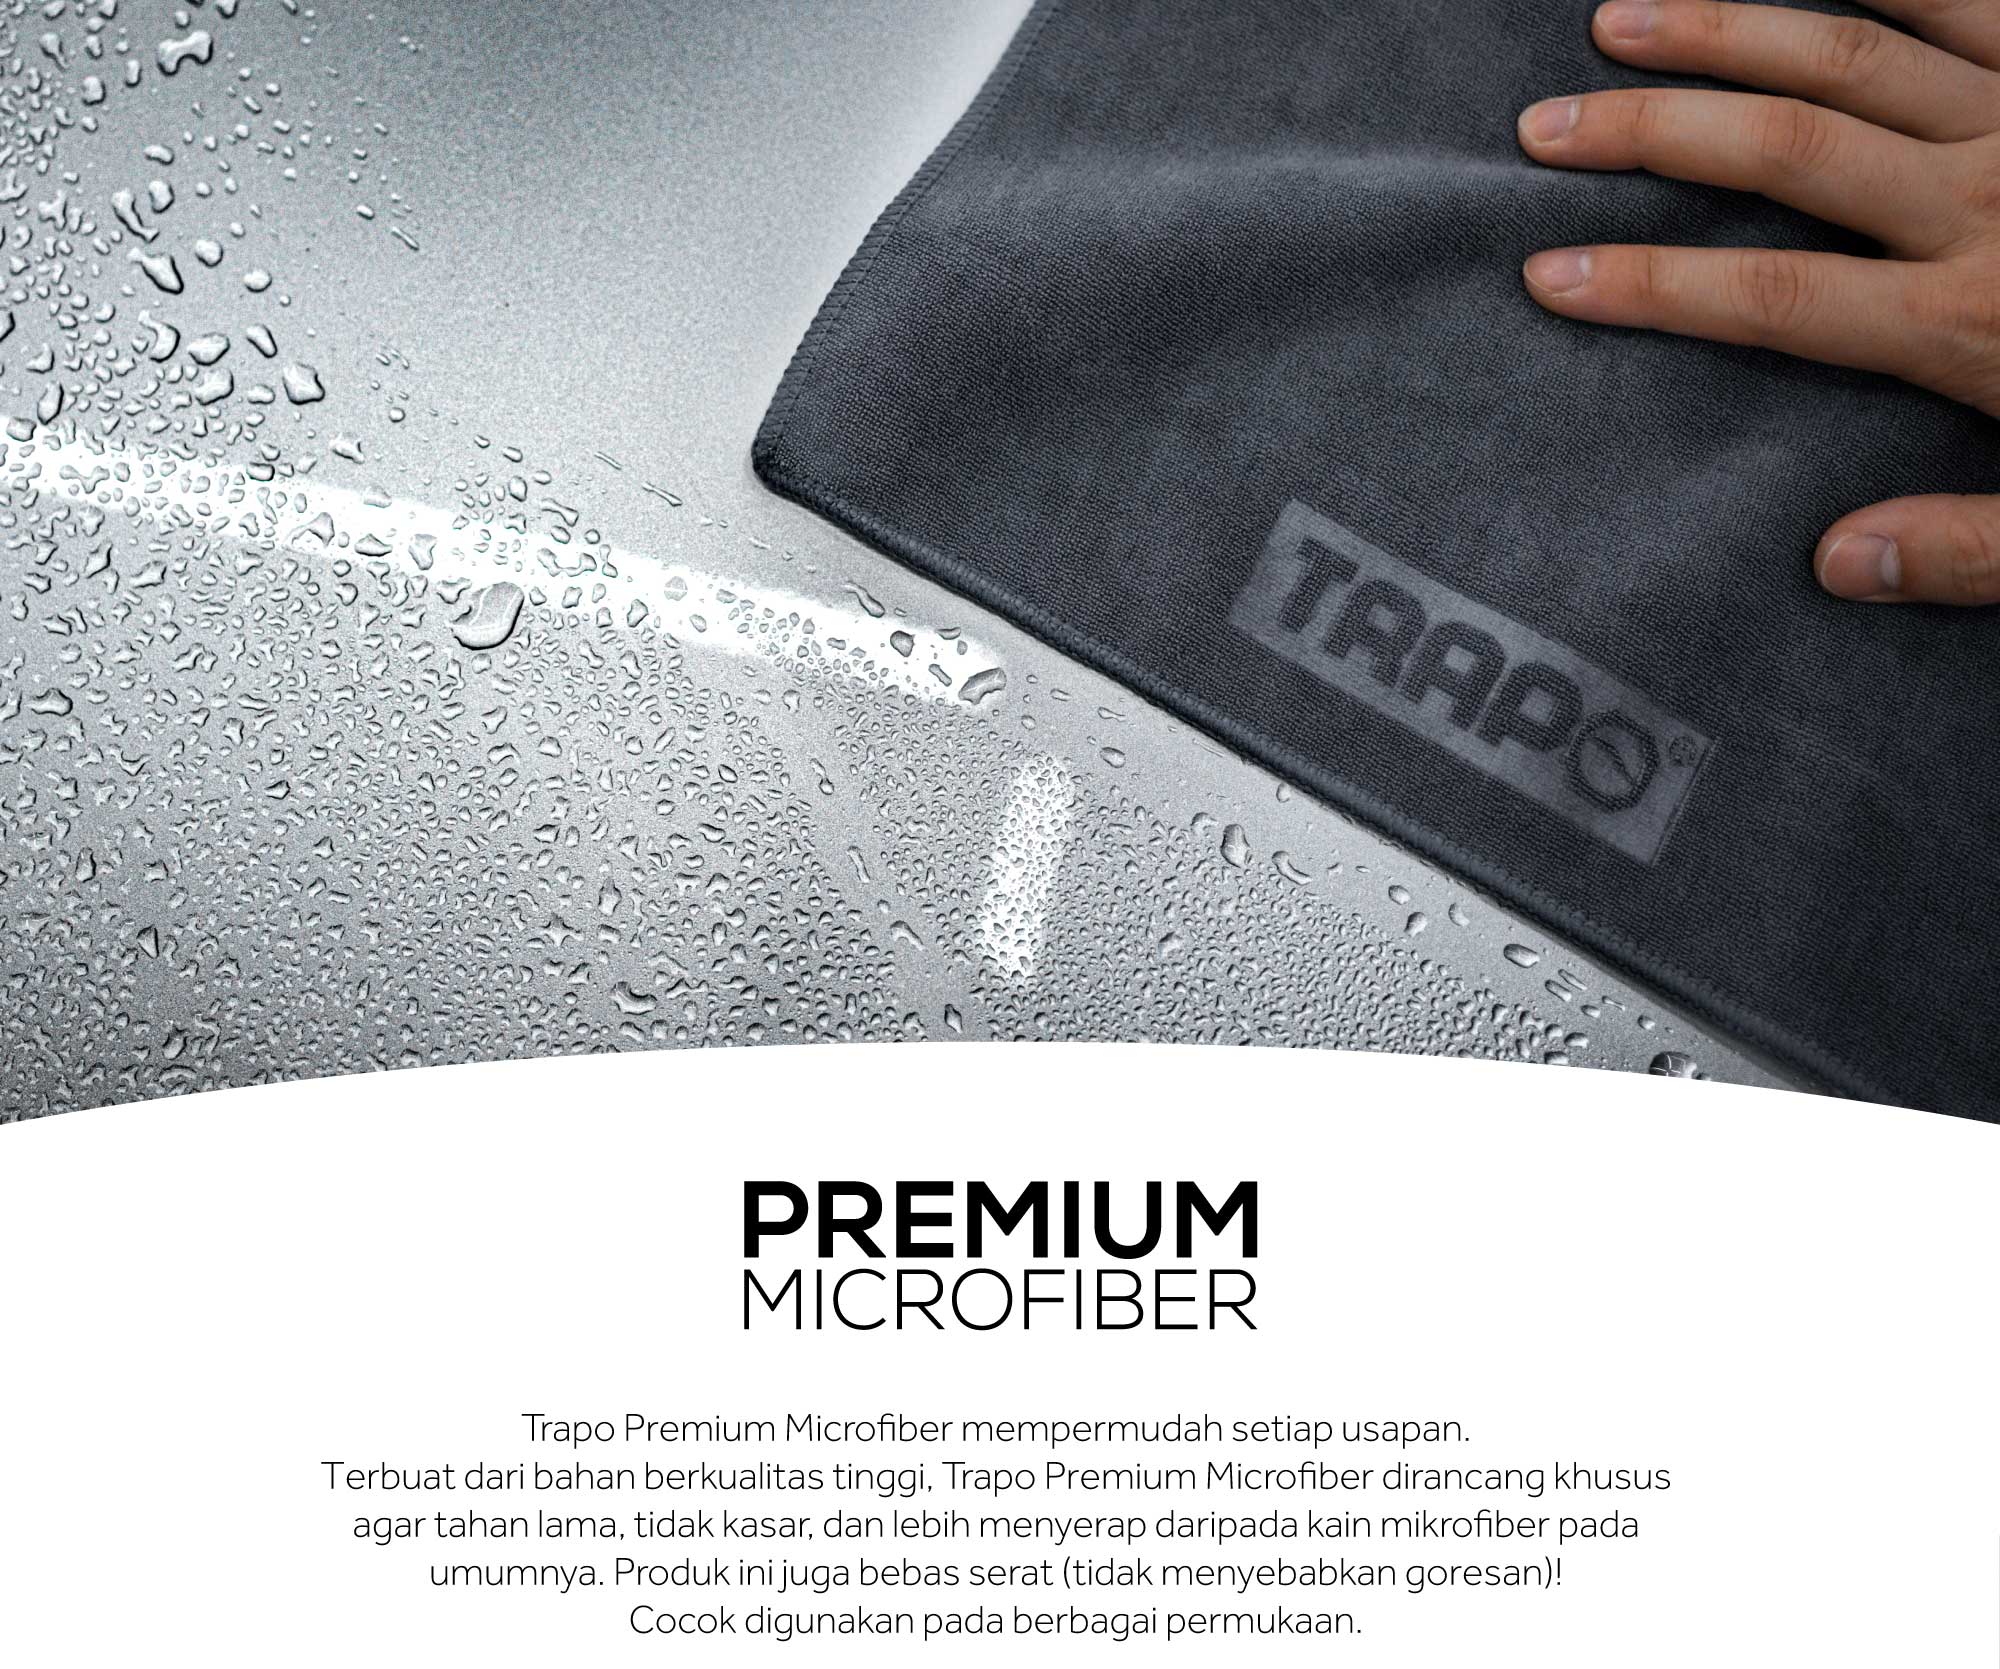 Premium Detailing Microfibre Trapo Premium Microfibre makes polishing effortless.Made of high-quality material, Trapo Premium Detailing Microfibre is specially designed to be durable, non-abrasive, and more absorbent than your average retail brand microfibre towels. Plus, it's lint-free! Suitable for use on any surface.